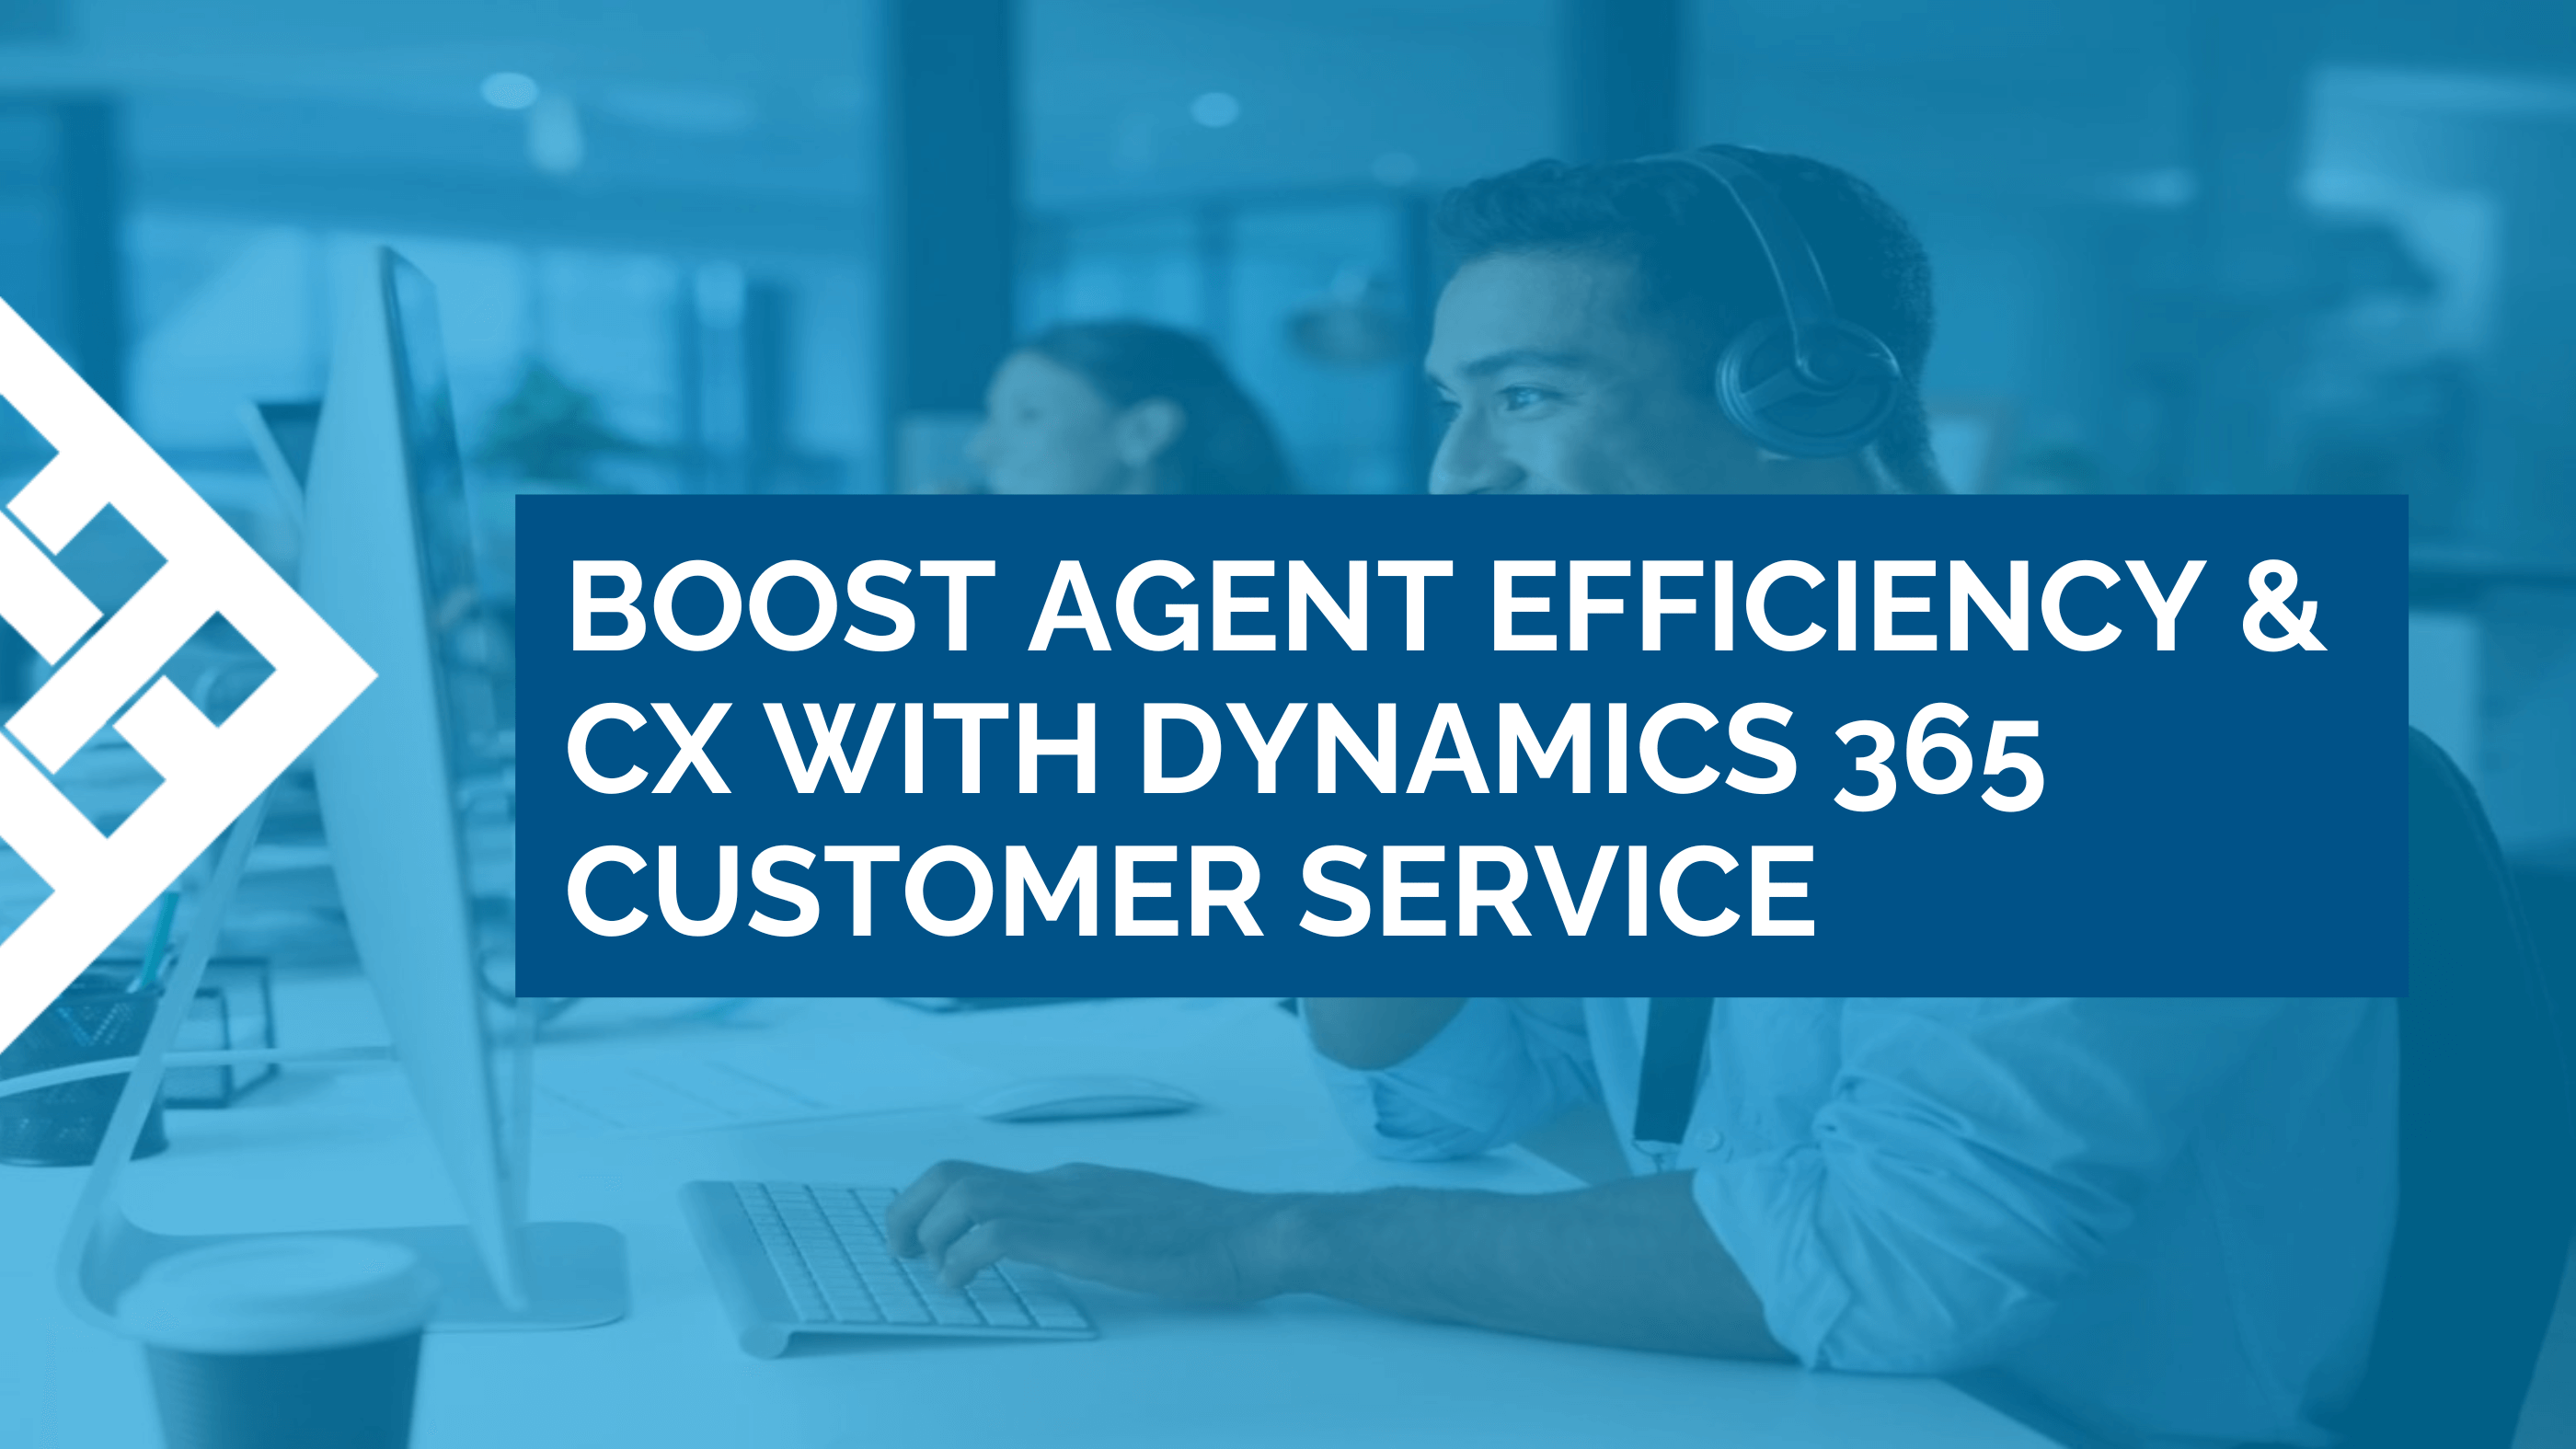 Boost Agent Efficiency & CX with Dynamics 365 Customer Service